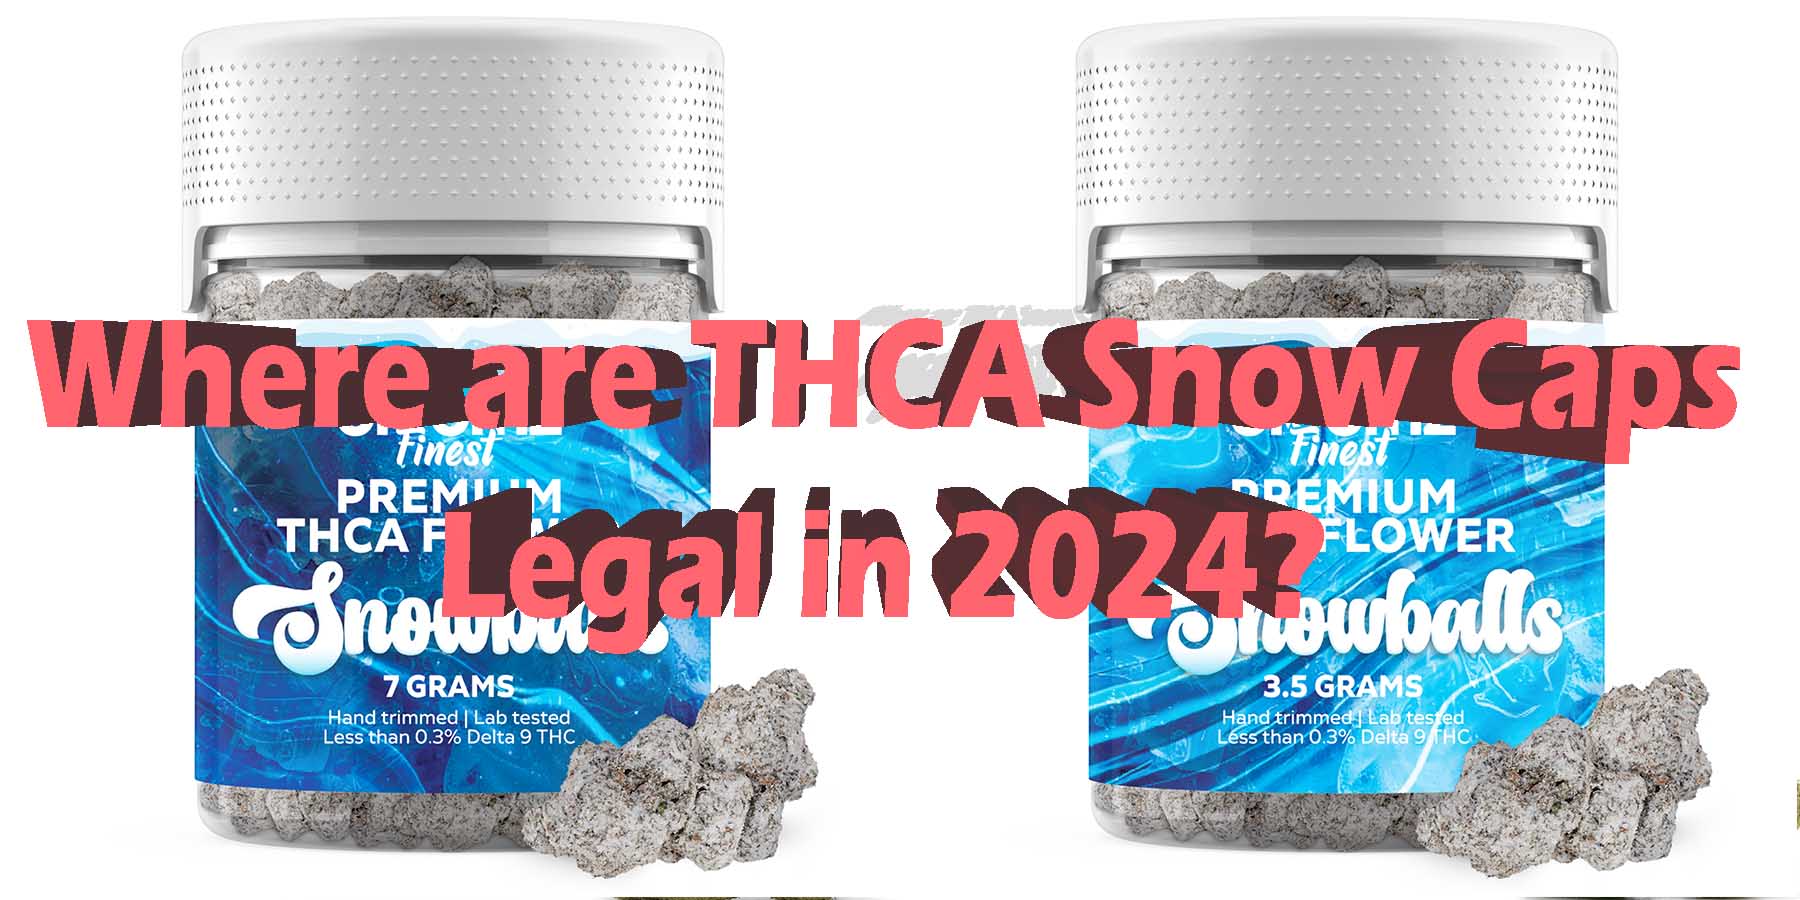 Where are THCA Snow Caps Legal in 2024 LowestPrice Coupon Discount For- Smoking Best High Smoke THCA THC Cannabinoids Shop Online Near Me Bloomz